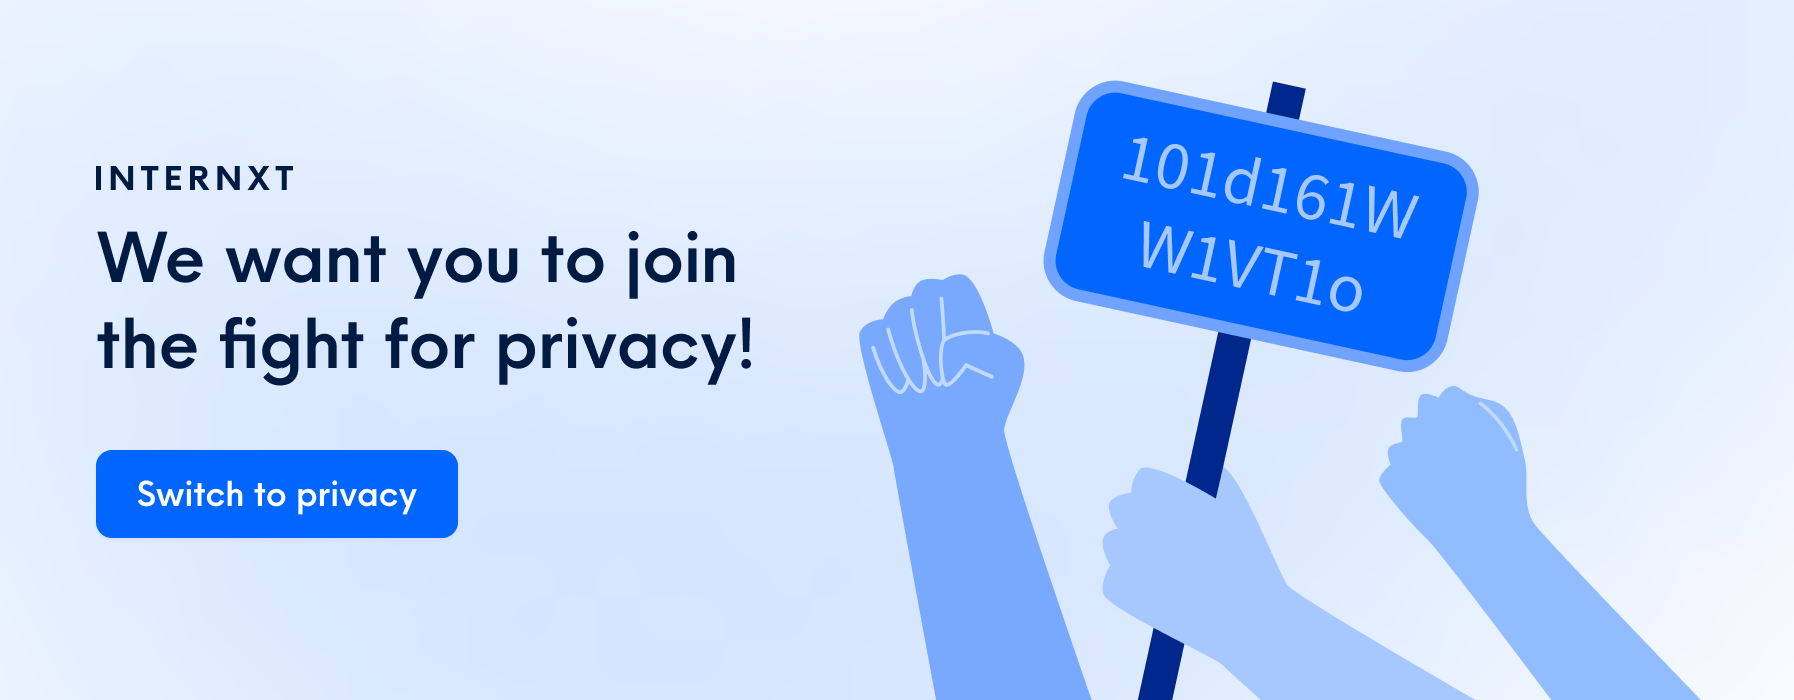 Internxt CTA: Fight for privacy